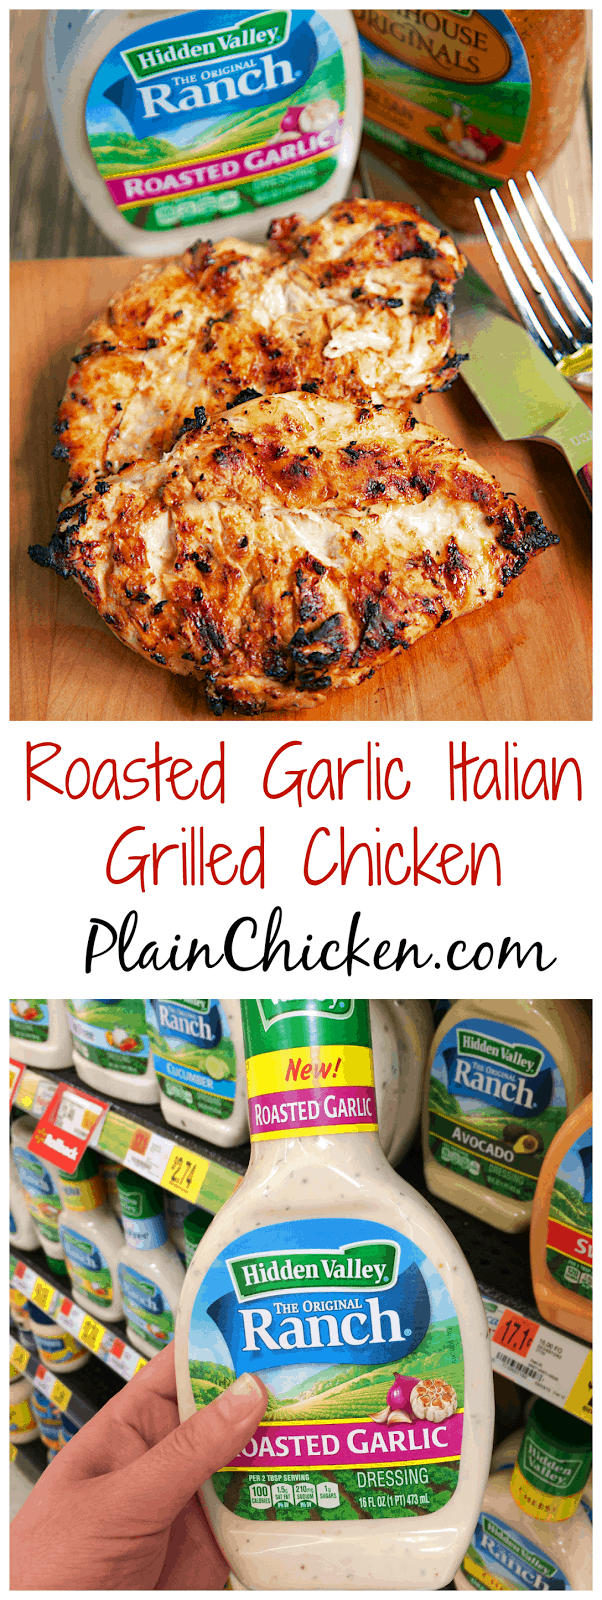 Roasted Garlic Italian Grilled Chicken - only 3 ingredients (including the chicken) - super simple marinade that packs a ton of great flavor! Quick, easy and delicious - my three favorite things!